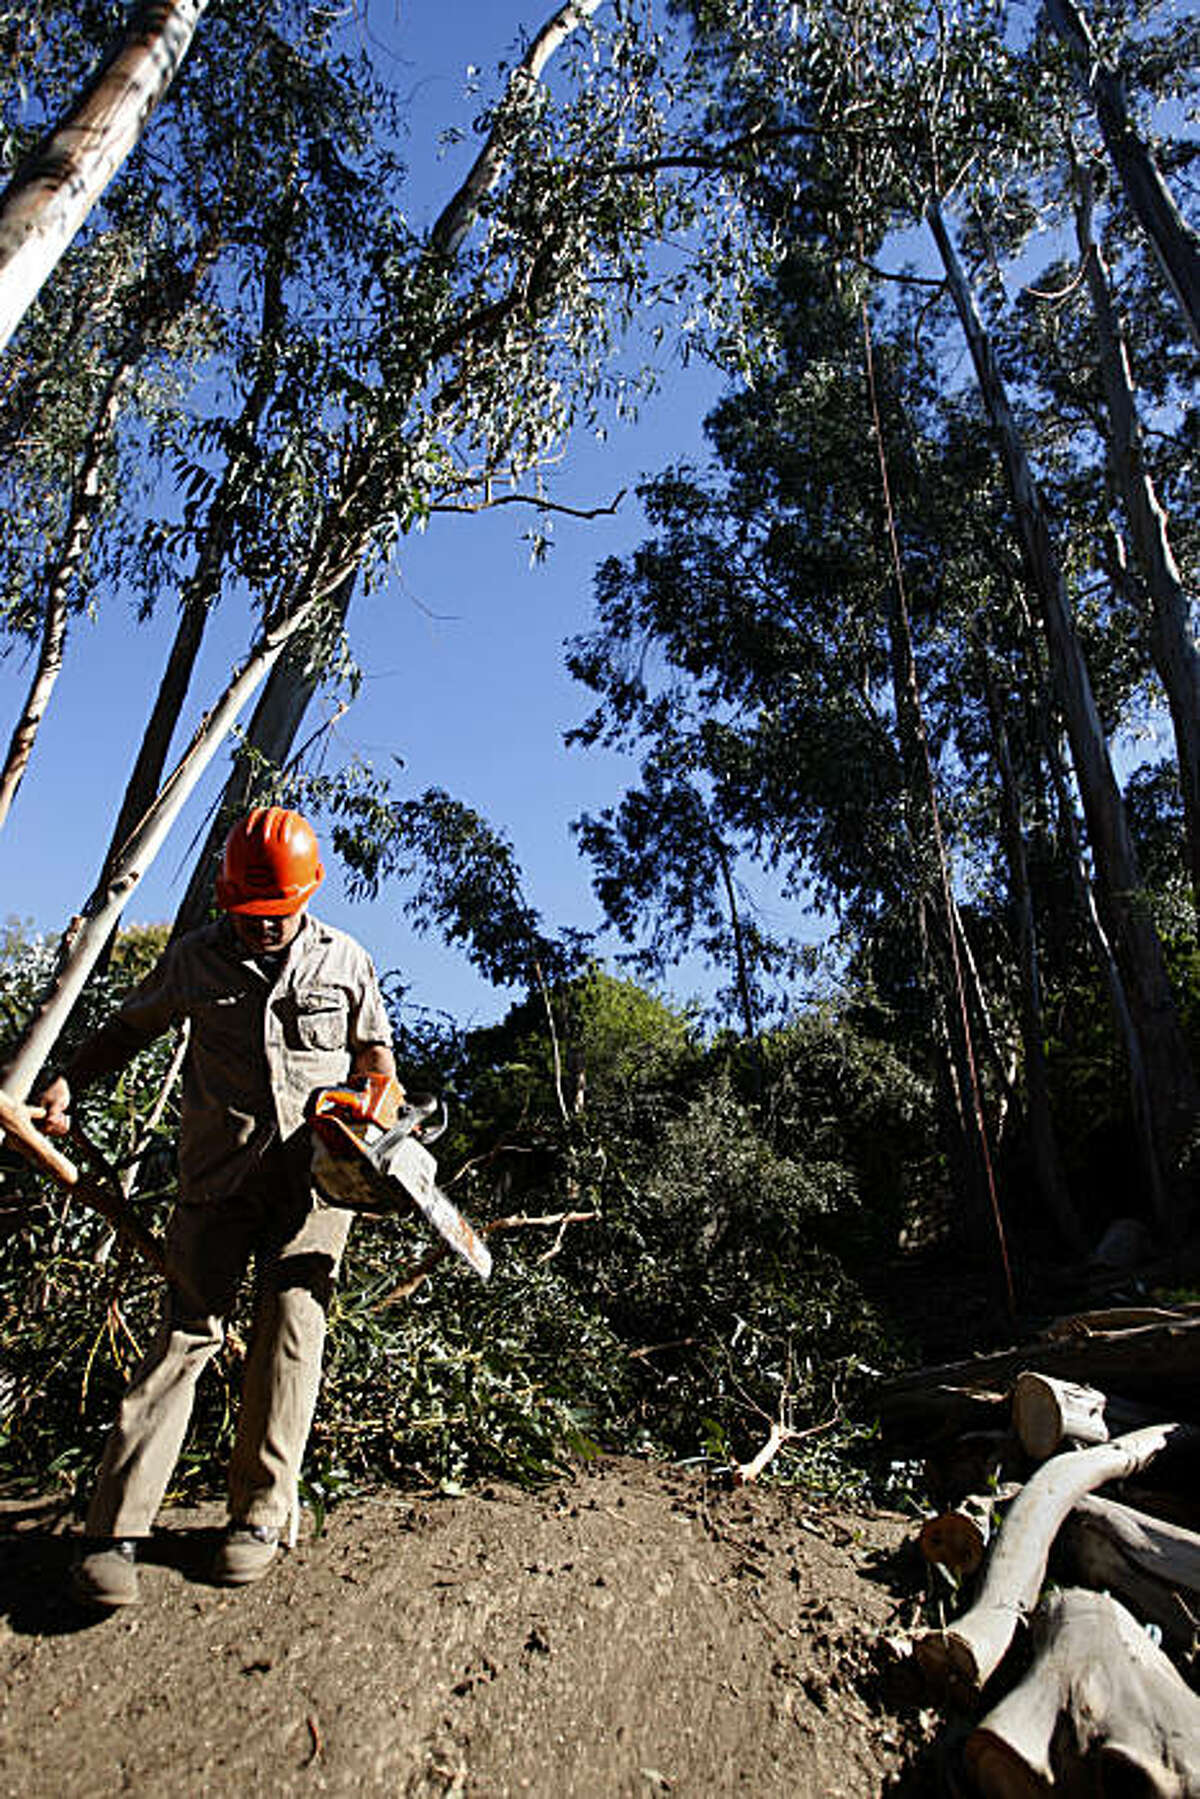 Federico Maldonado, worker from The Small World Tree Company, moves tree branches out of the way in Larkspur, Cailf., on Oct. 15, 2010.